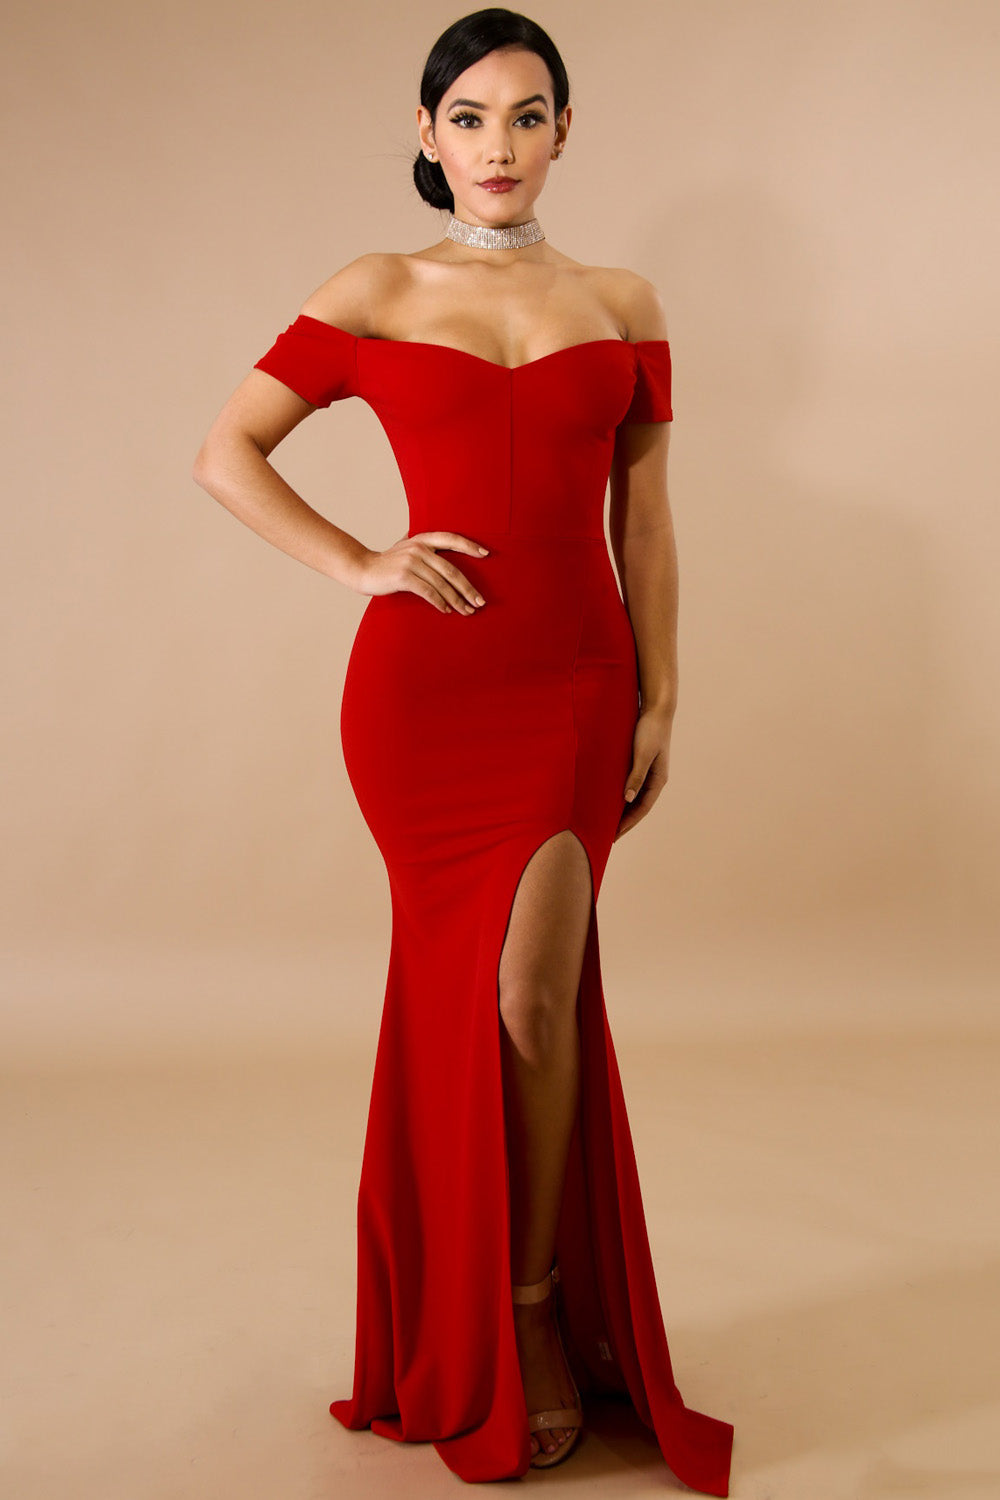 goPals full length red off-the-shoulder dress with thigh high slit. 